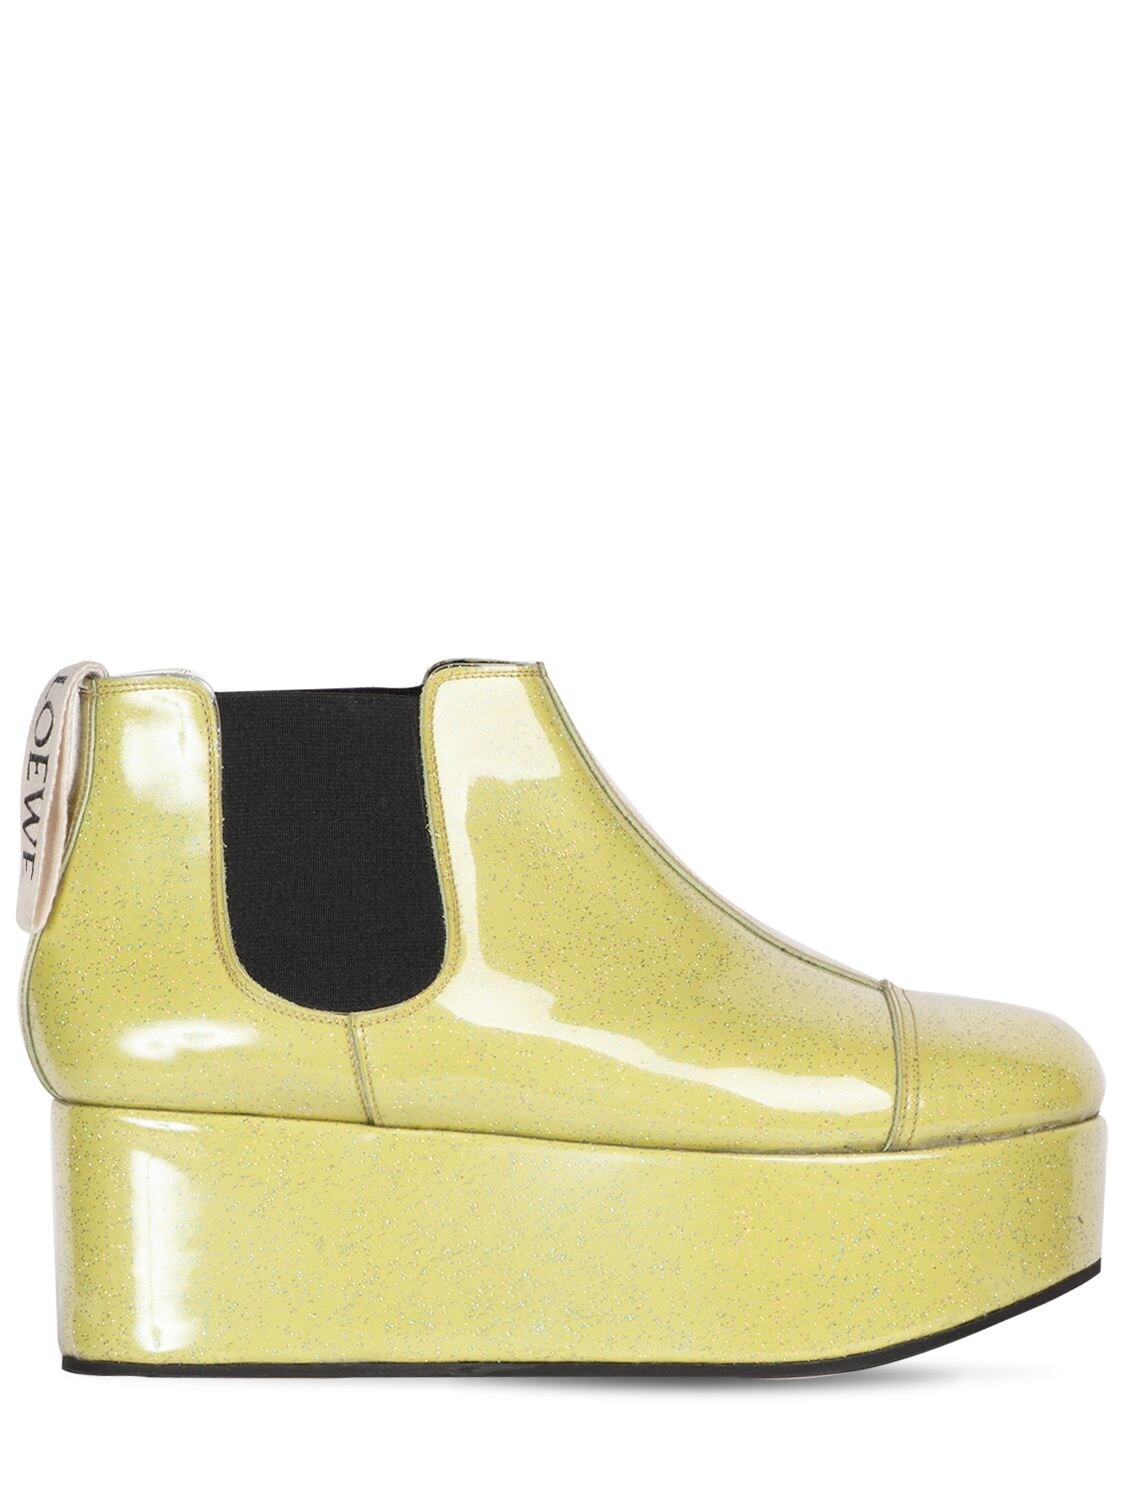 60mm Patent Leather Wedge Chelsea Boots